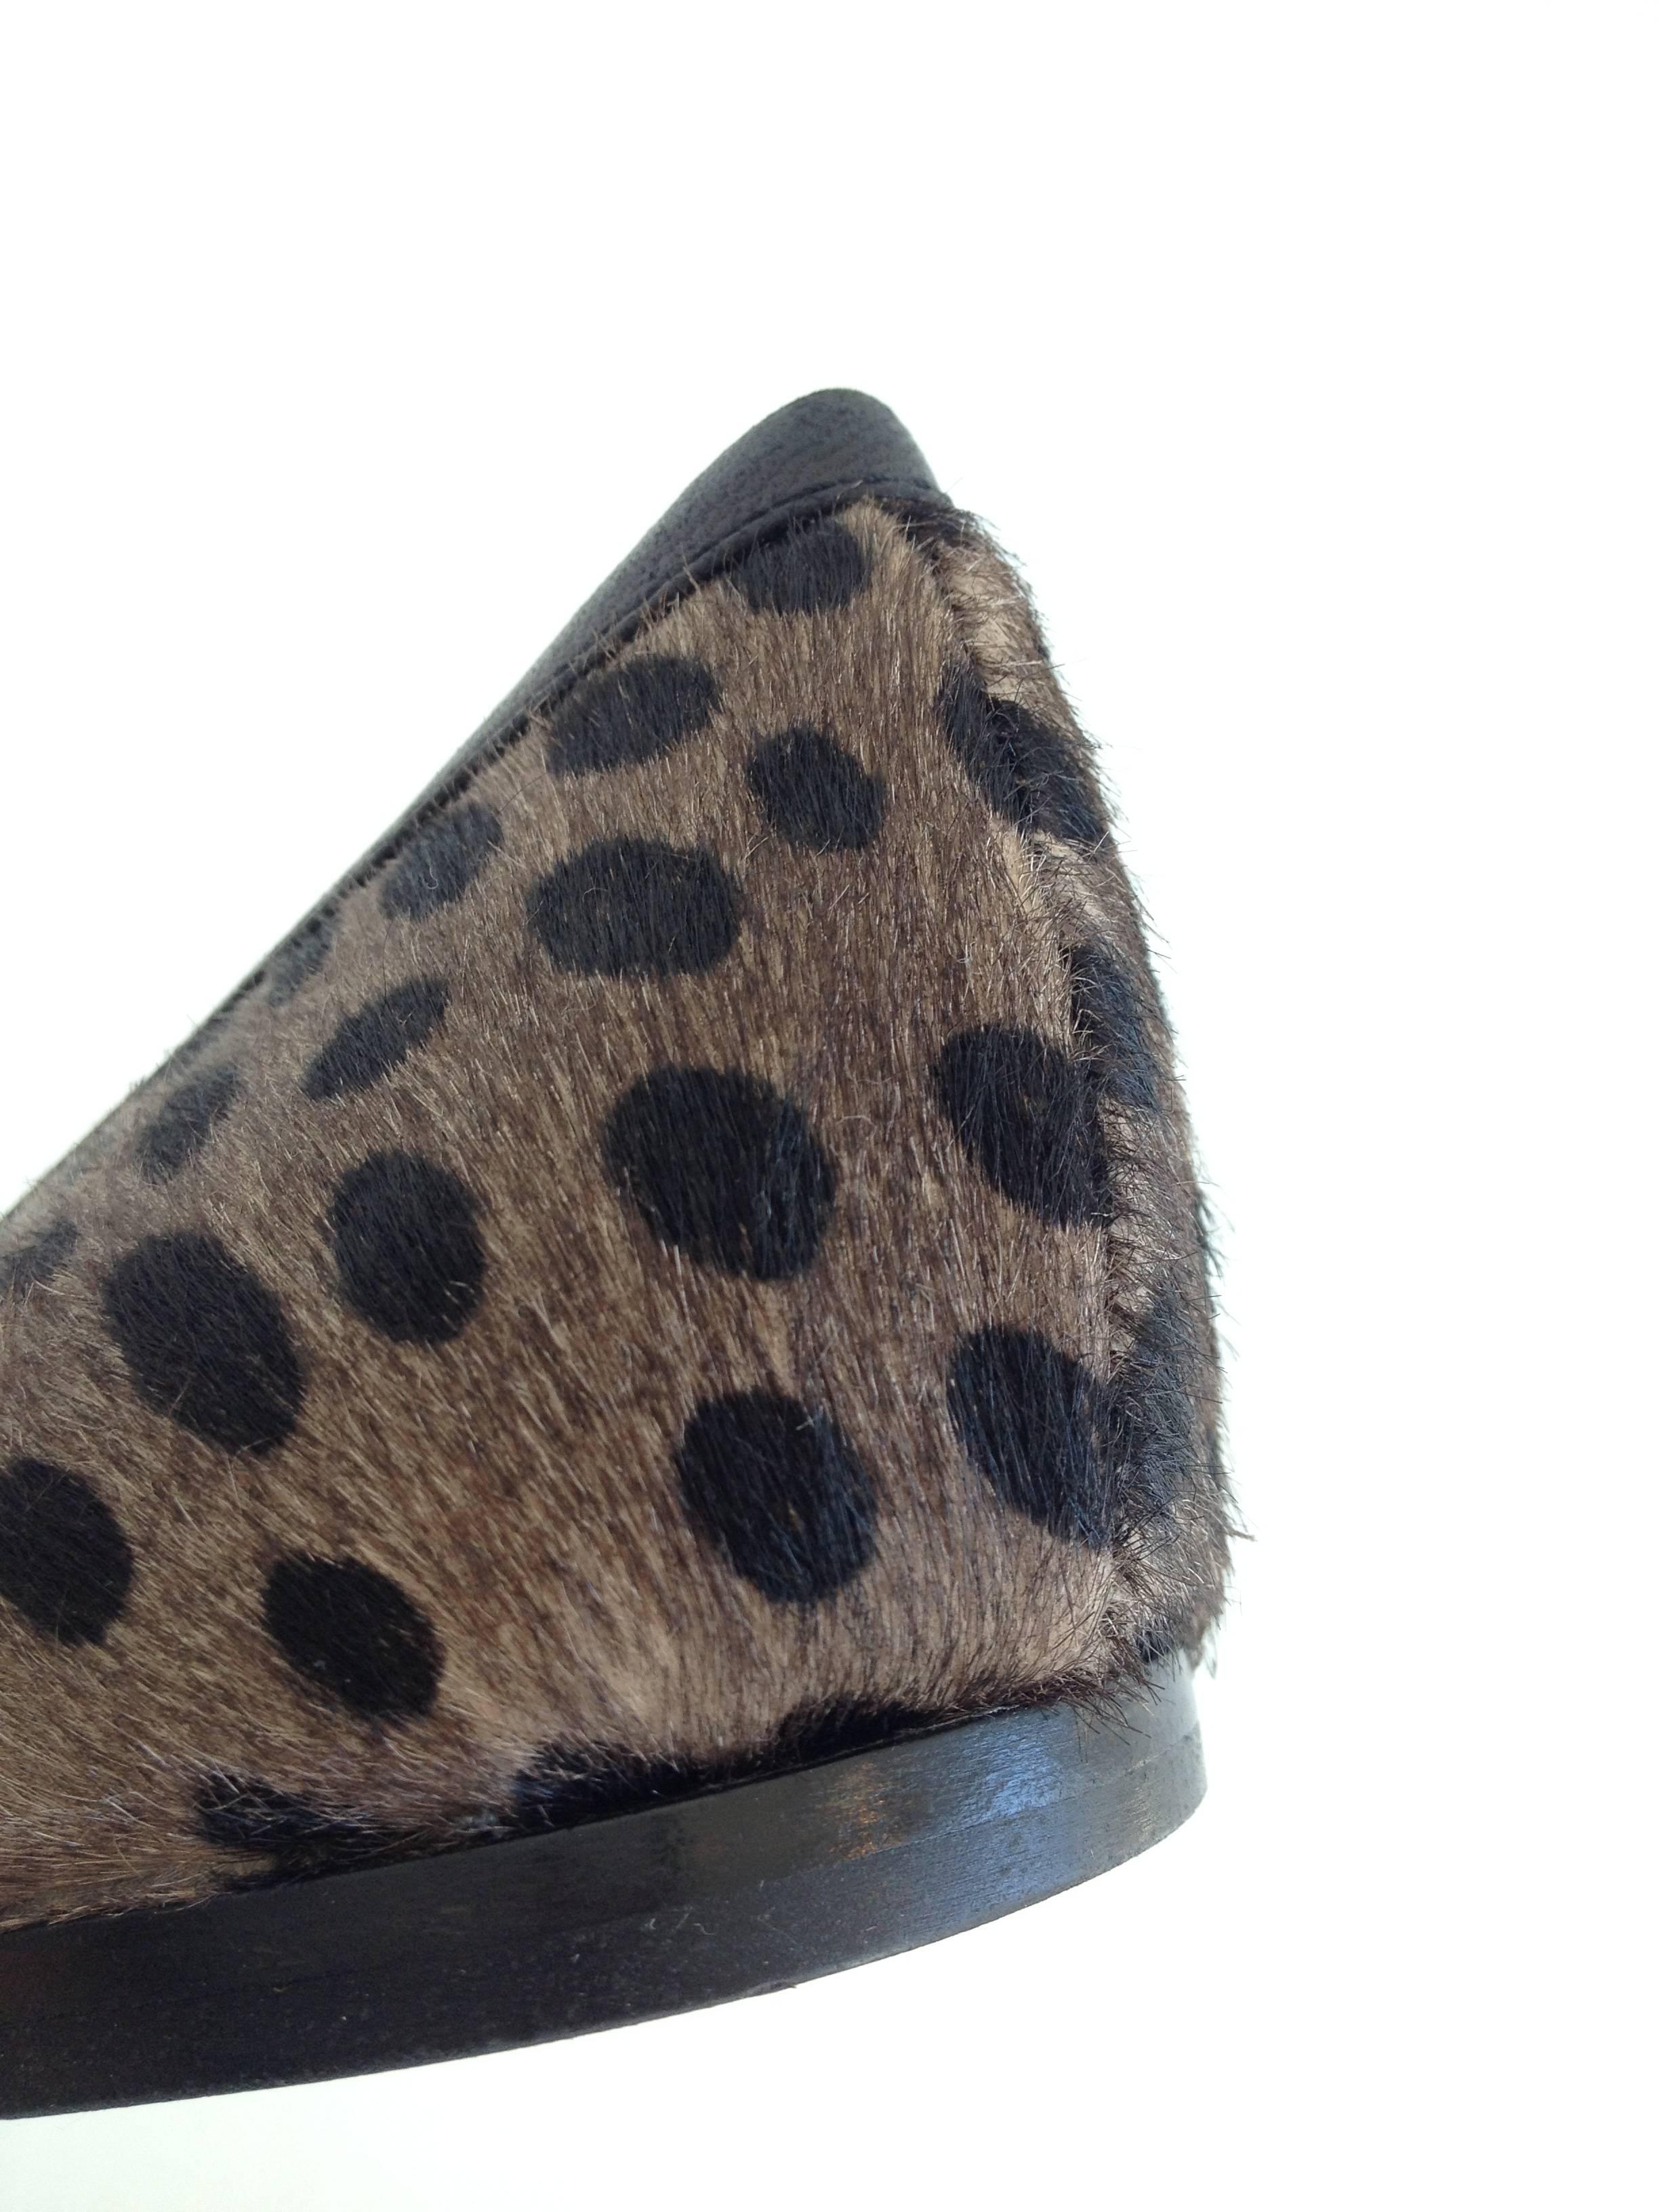 Alaia Brown Spotted Ponyhair Flats Size 37 1